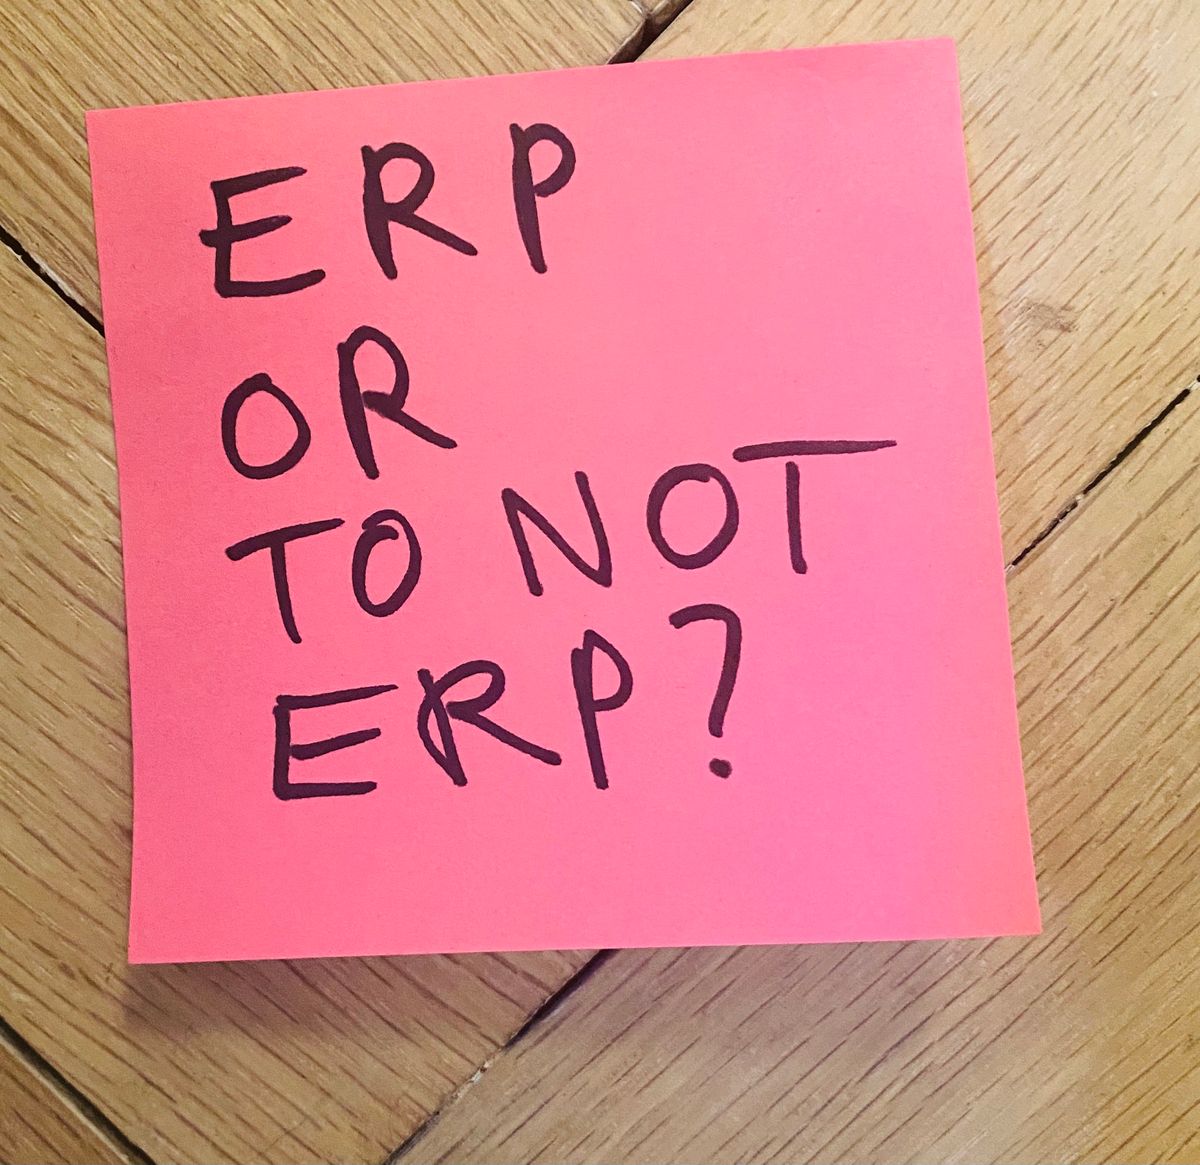 ERP or not to ERP? That is the question.